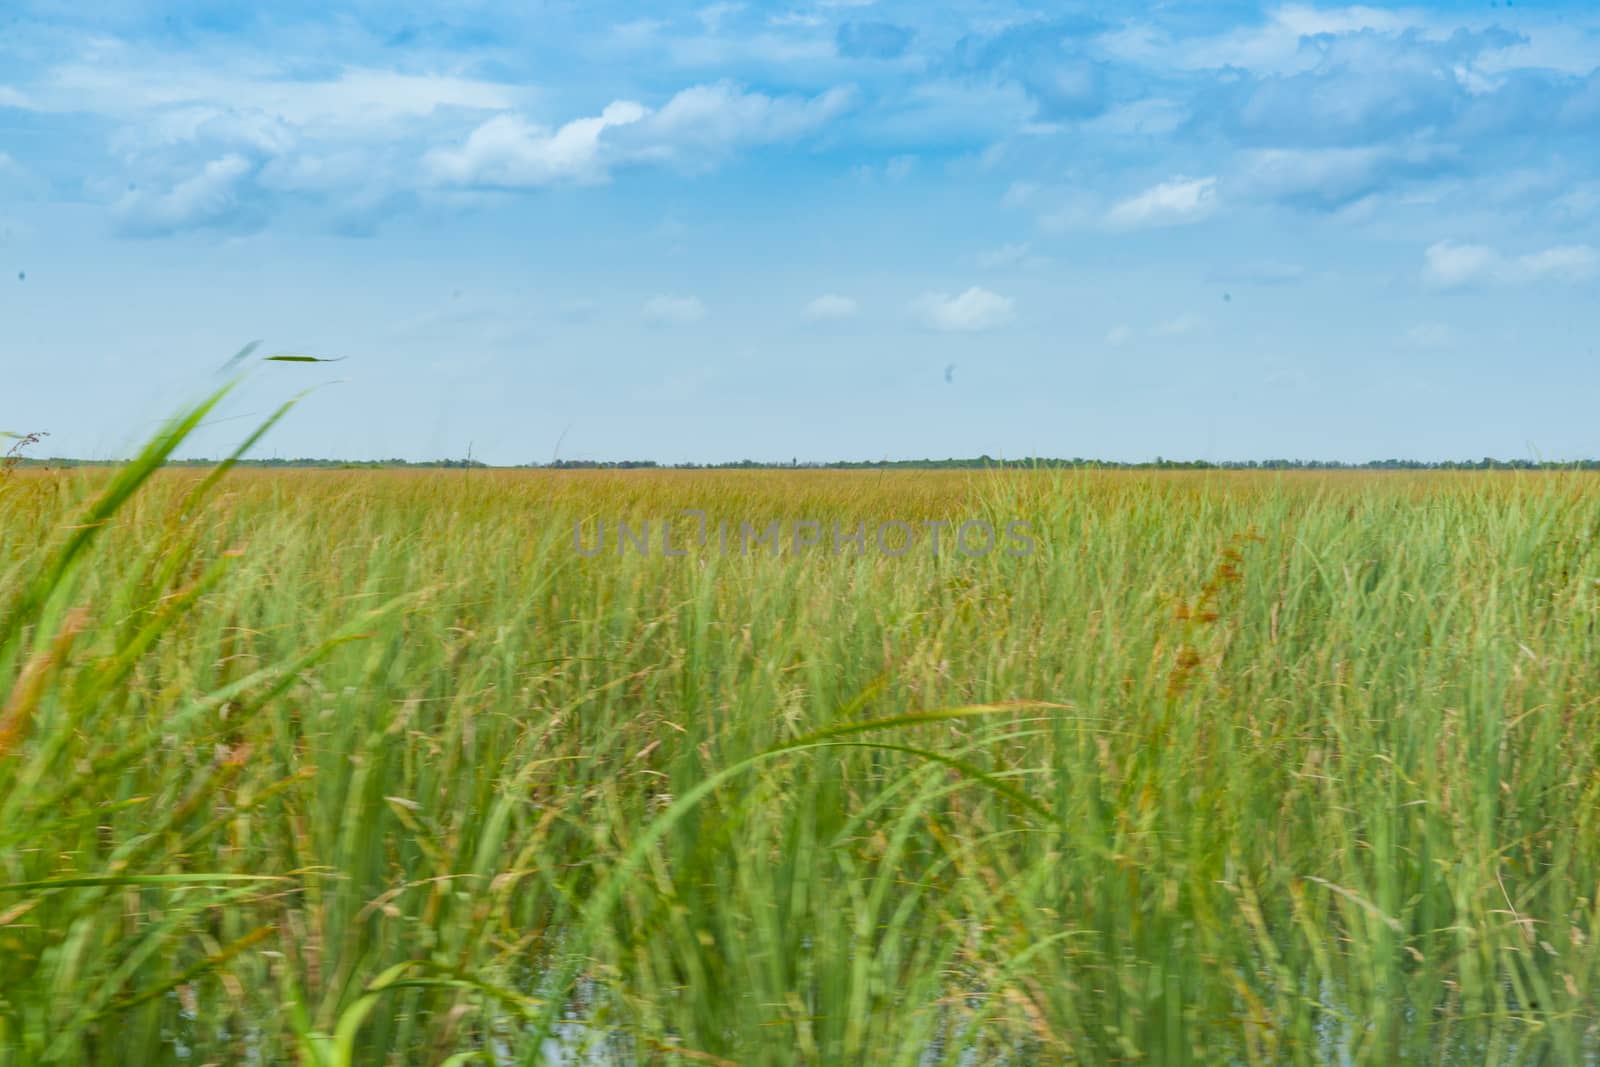 Wide reed covered flat wetlands of Florida everglades as environmental background with blurred reeds blowing in breeze.